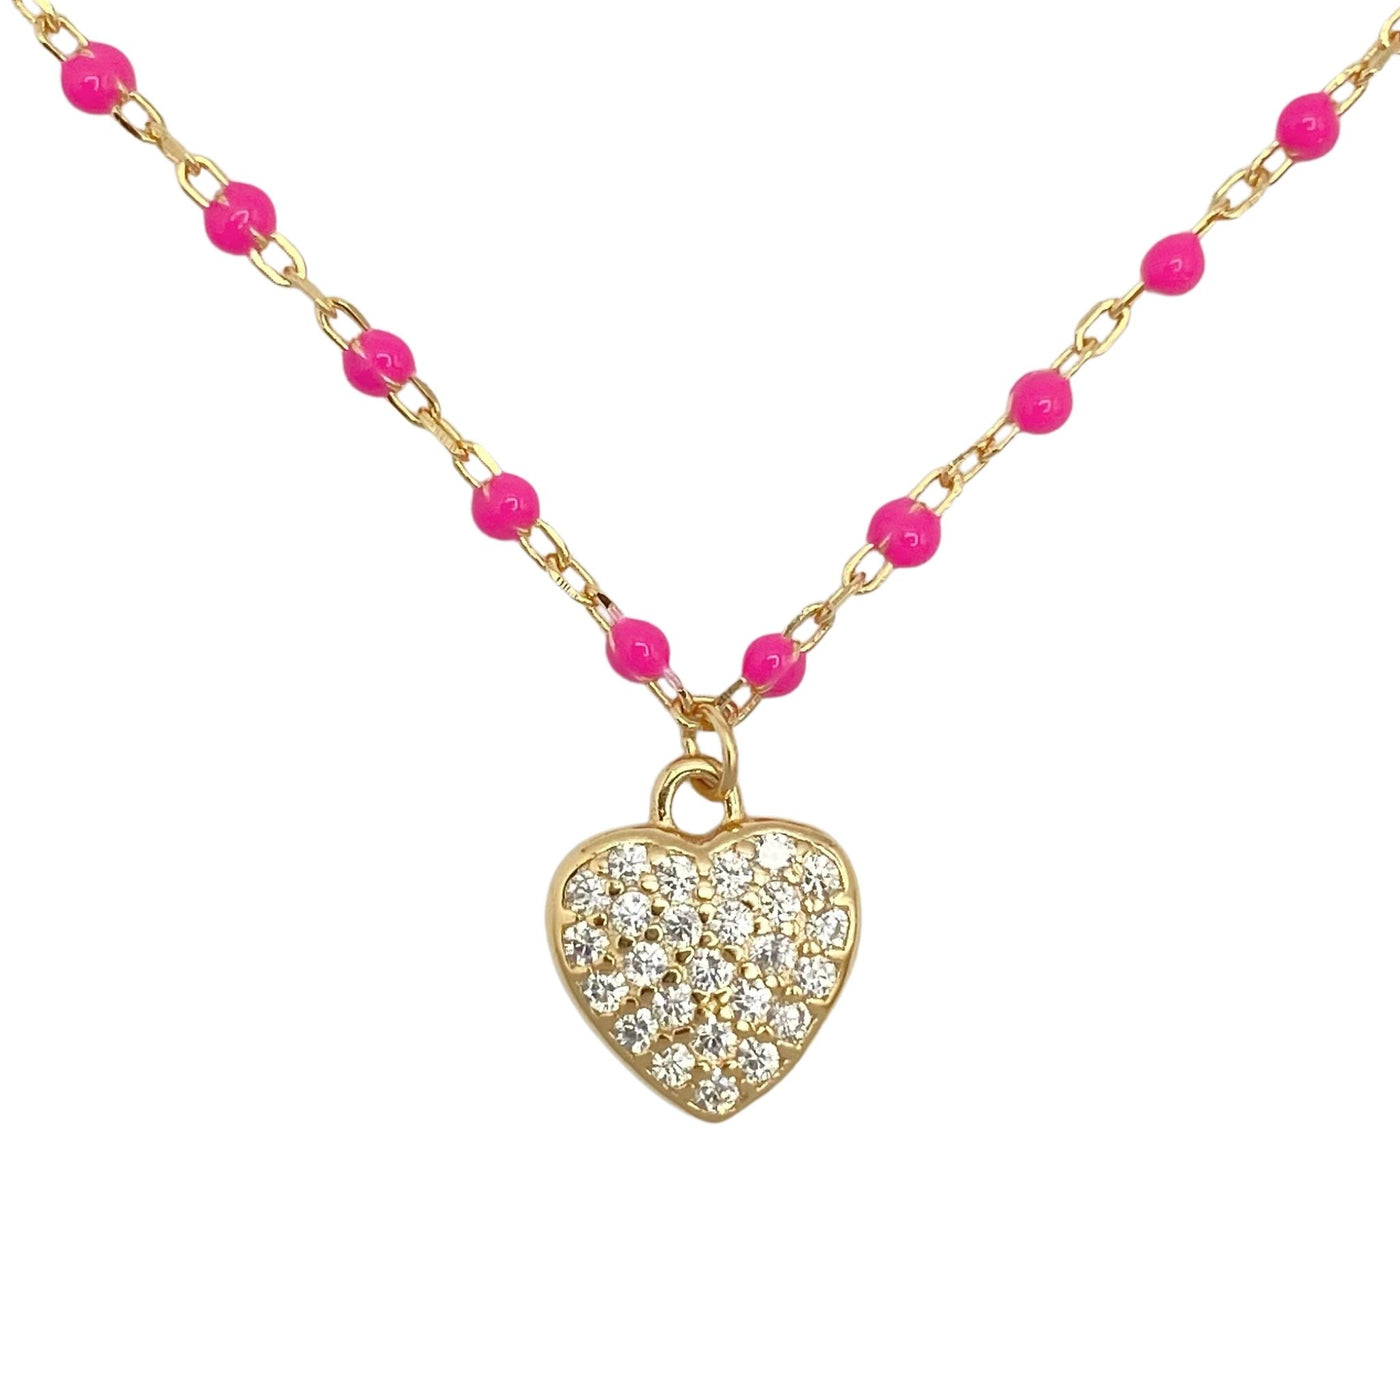 Silver enamel necklace with heart charm